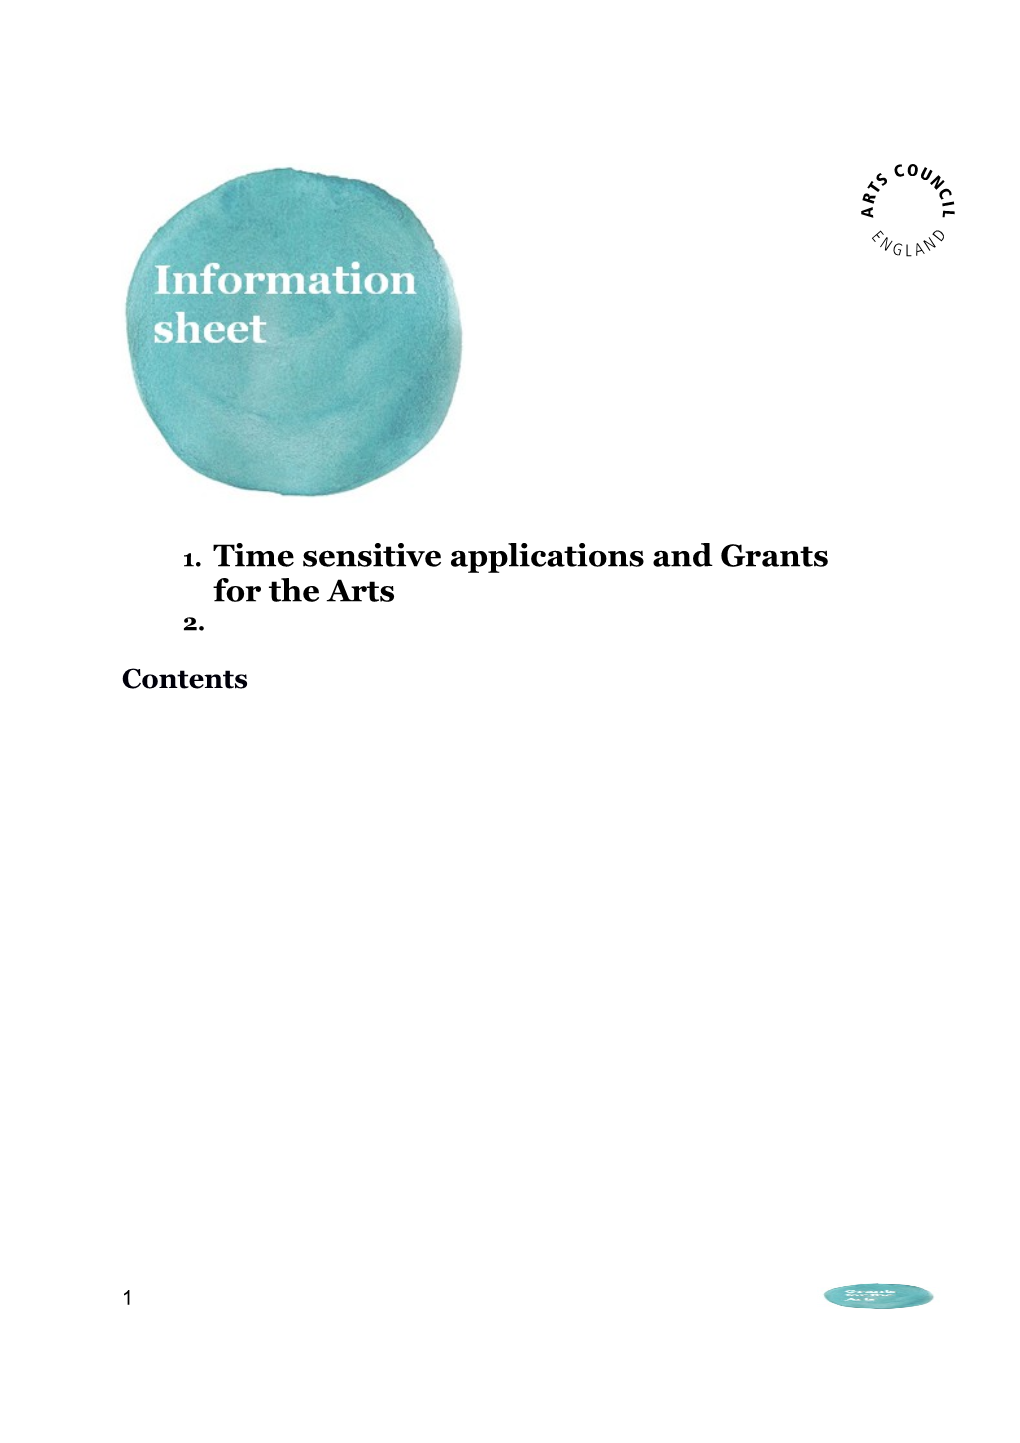 Time Sensitive Applications and Grants for the Arts